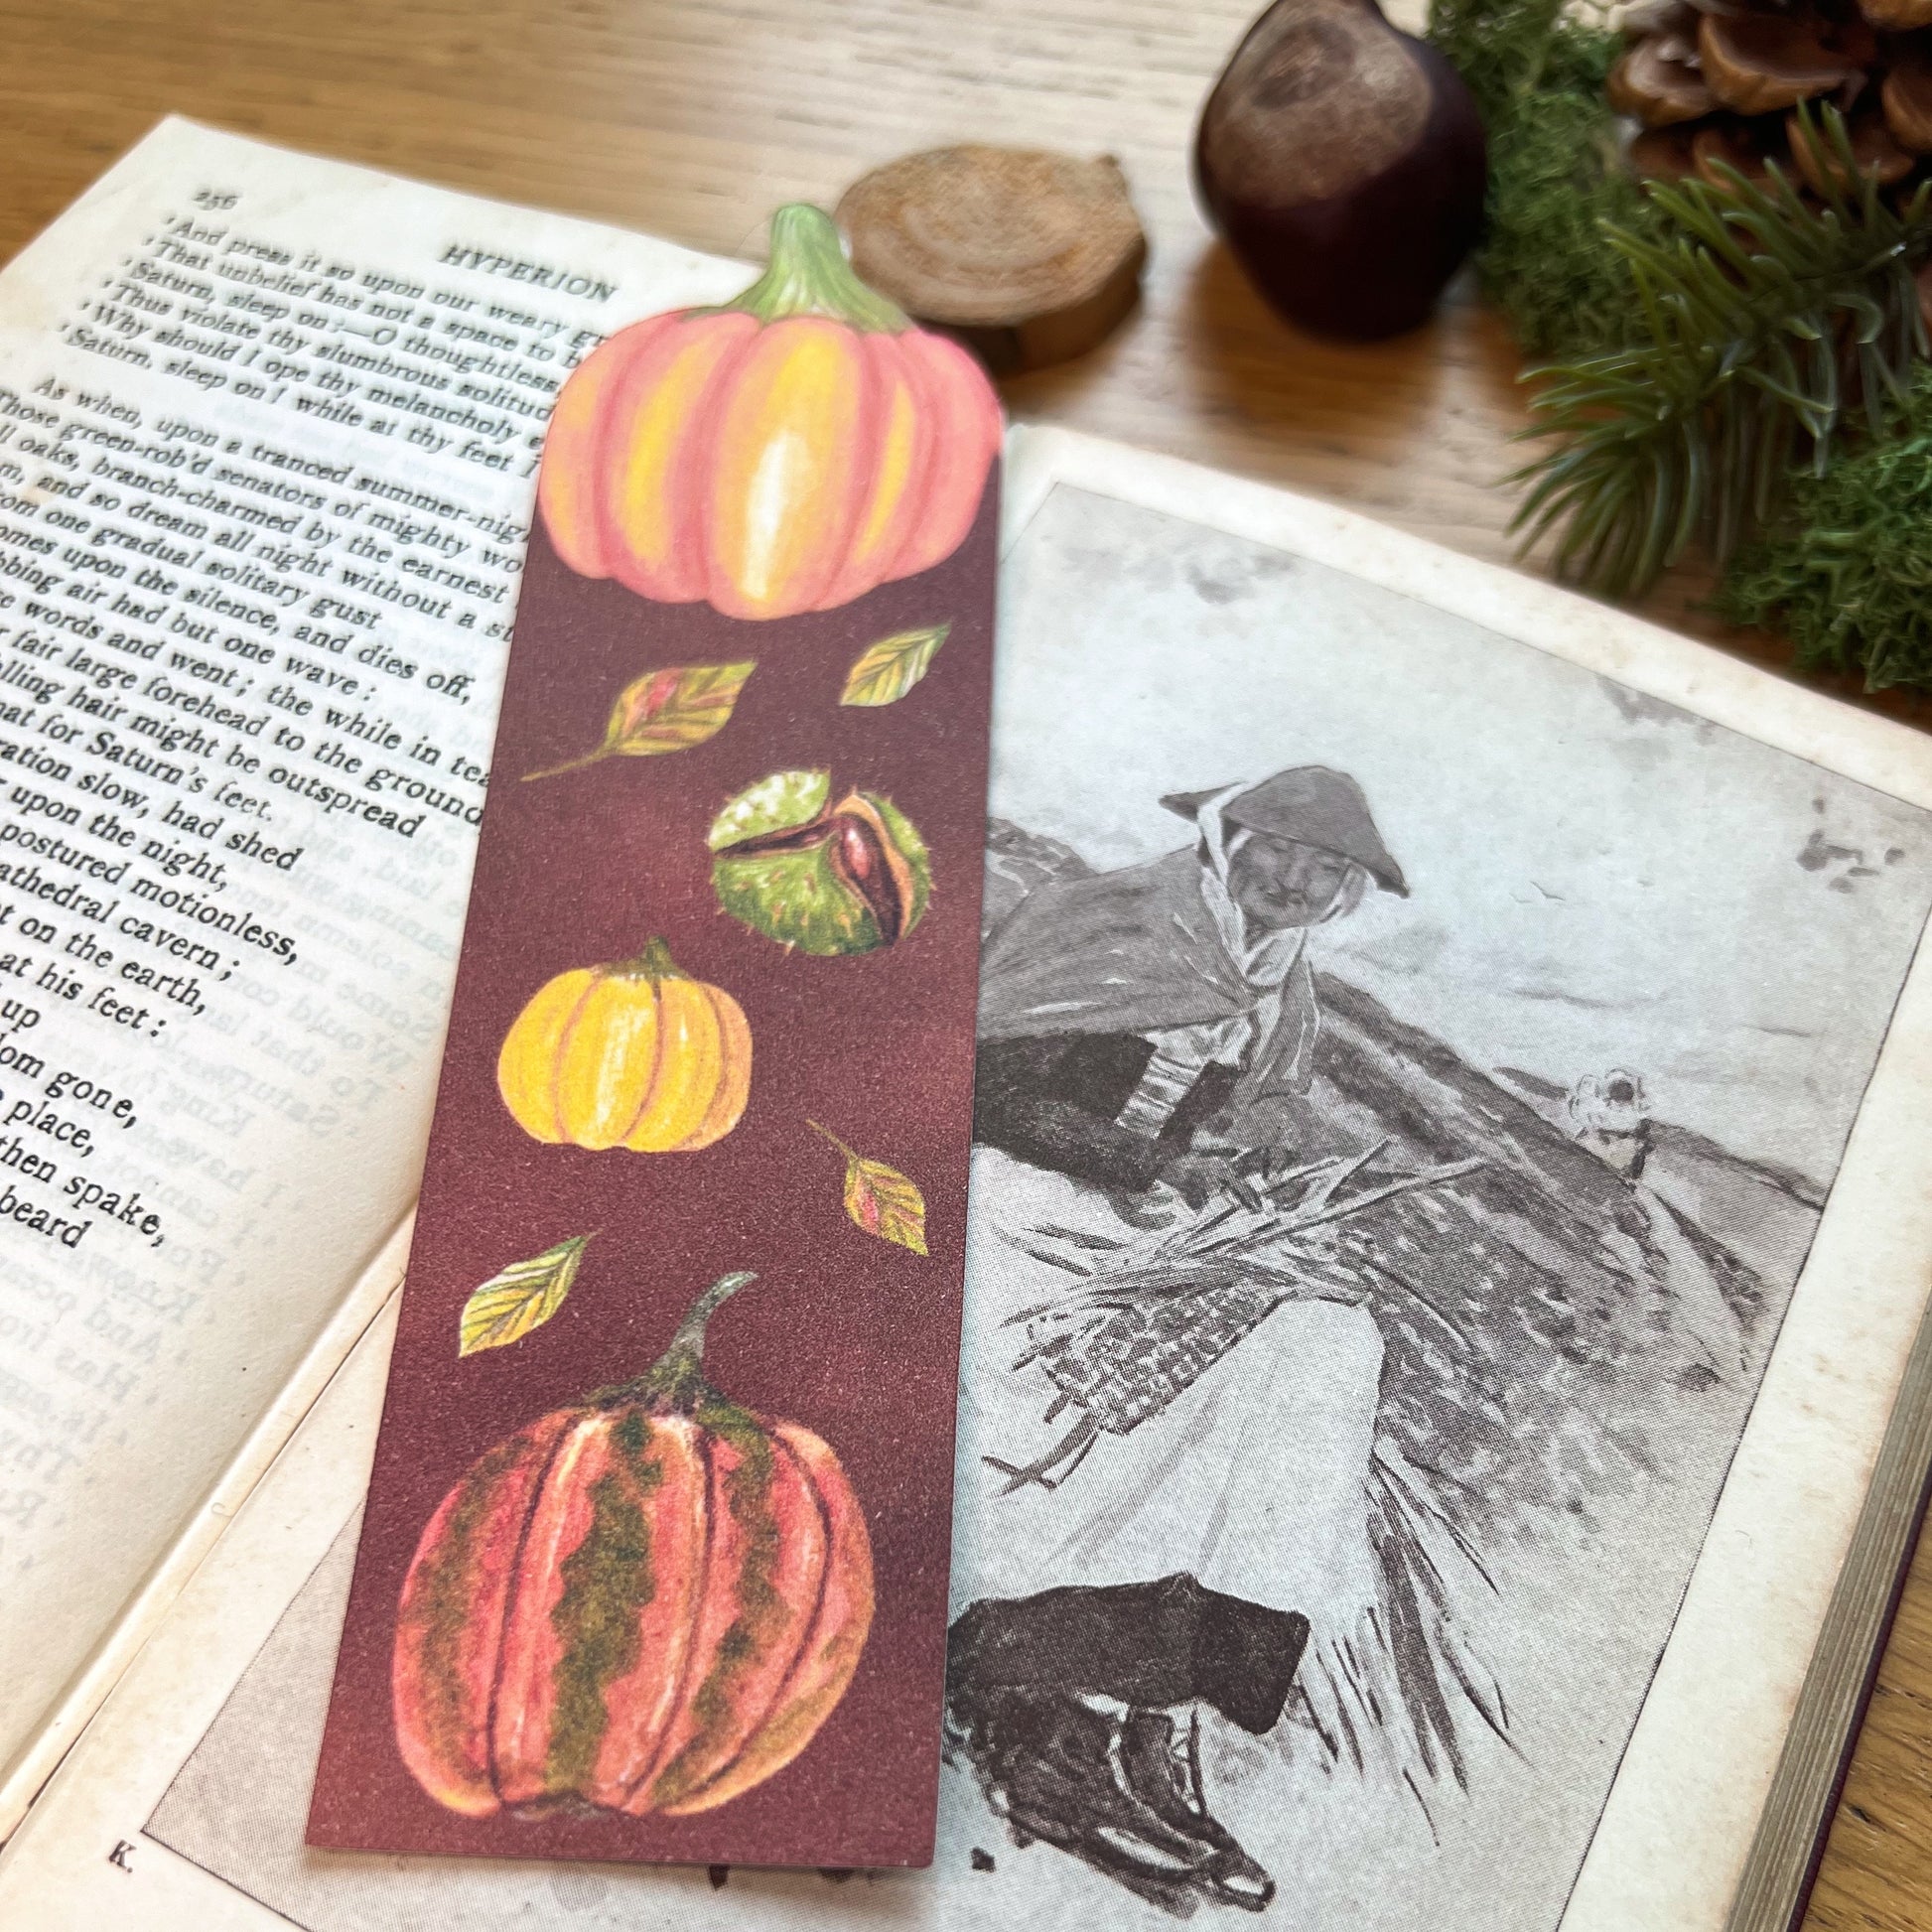 Fall Forage Pumpkin Bookmark featuring two orange and one yellow pumpkins with autmnal leabes tumbling dow the illustrated bookmark. An orange Cinderella pumpkin is cut out at the top, and the bookmark is resting on the open pages of a book